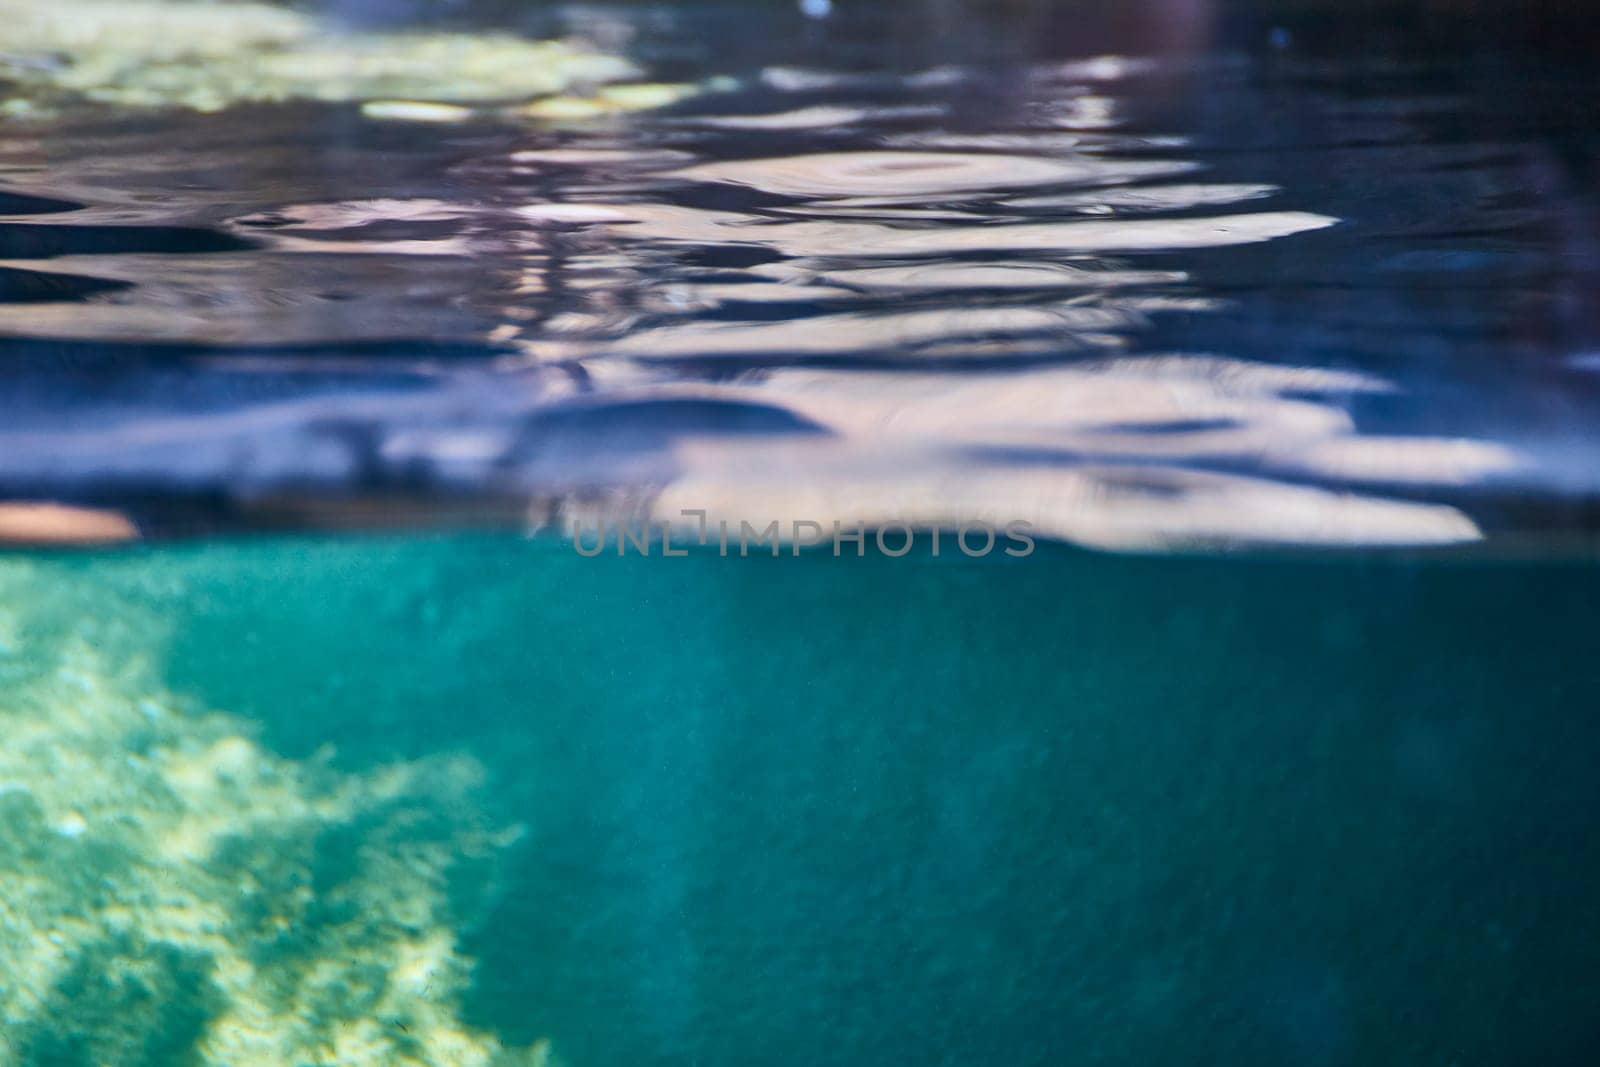 Captivating dual-view image showcasing the serene underwater world and dynamic water surface at Fort Wayne.